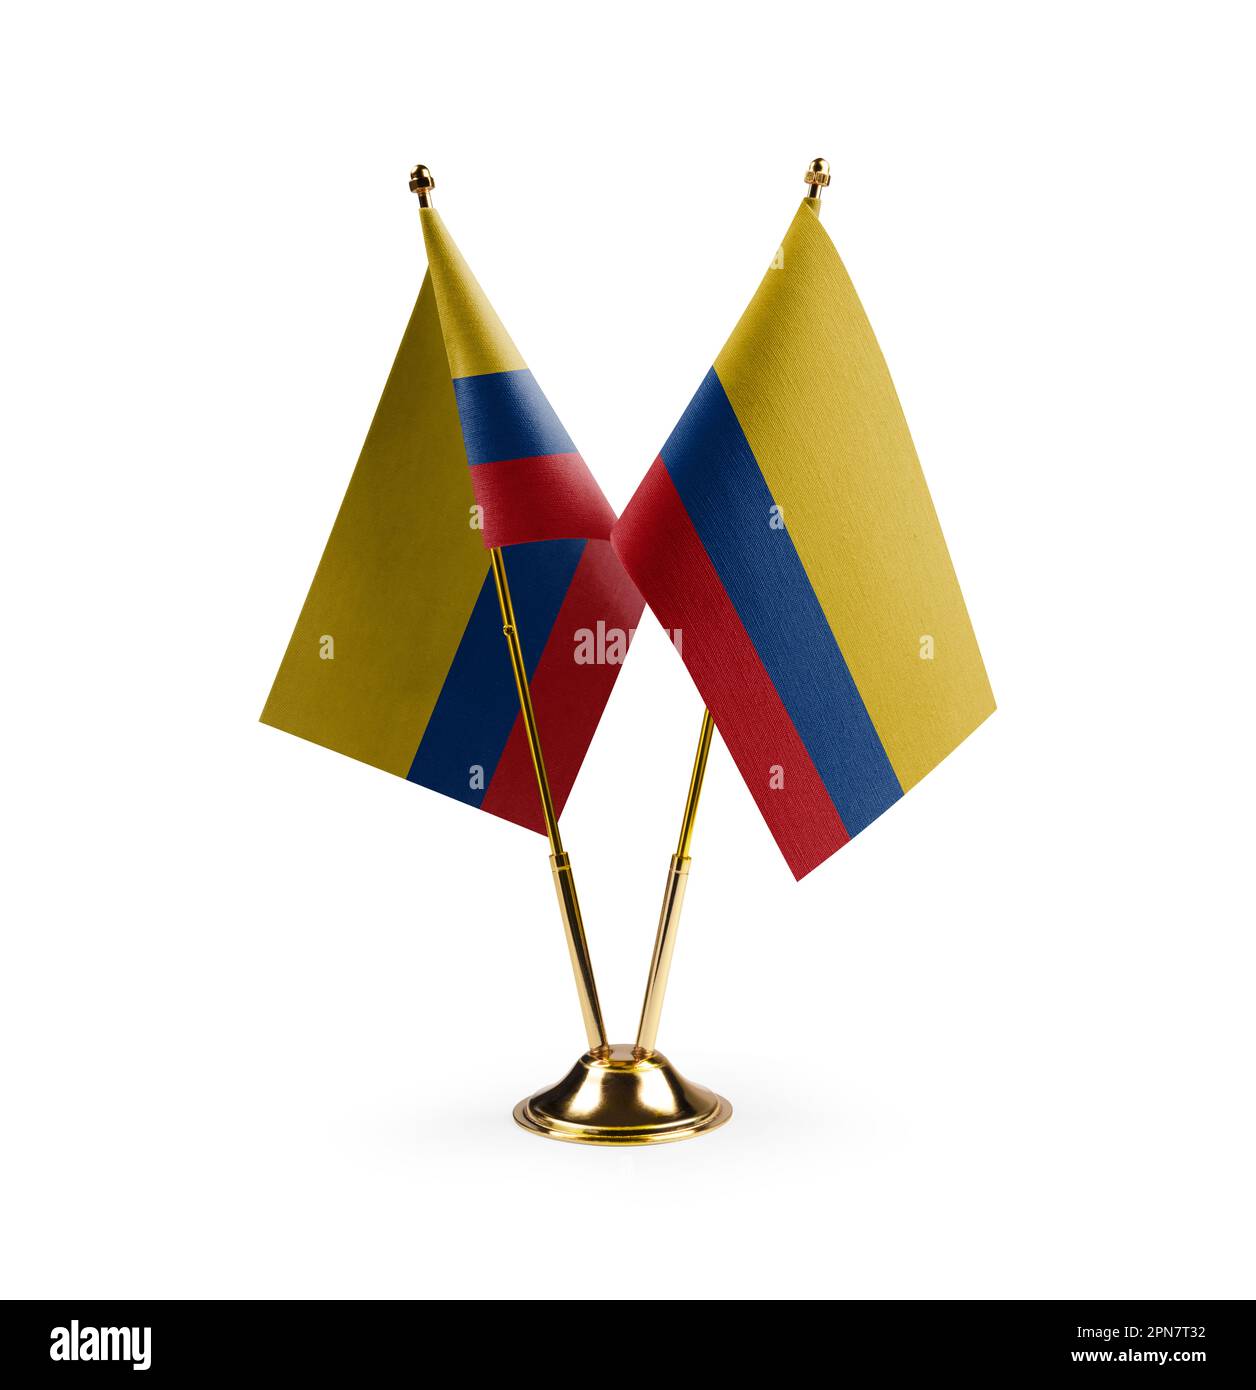 Small national flags of the Colombia on a white background. Stock Photo